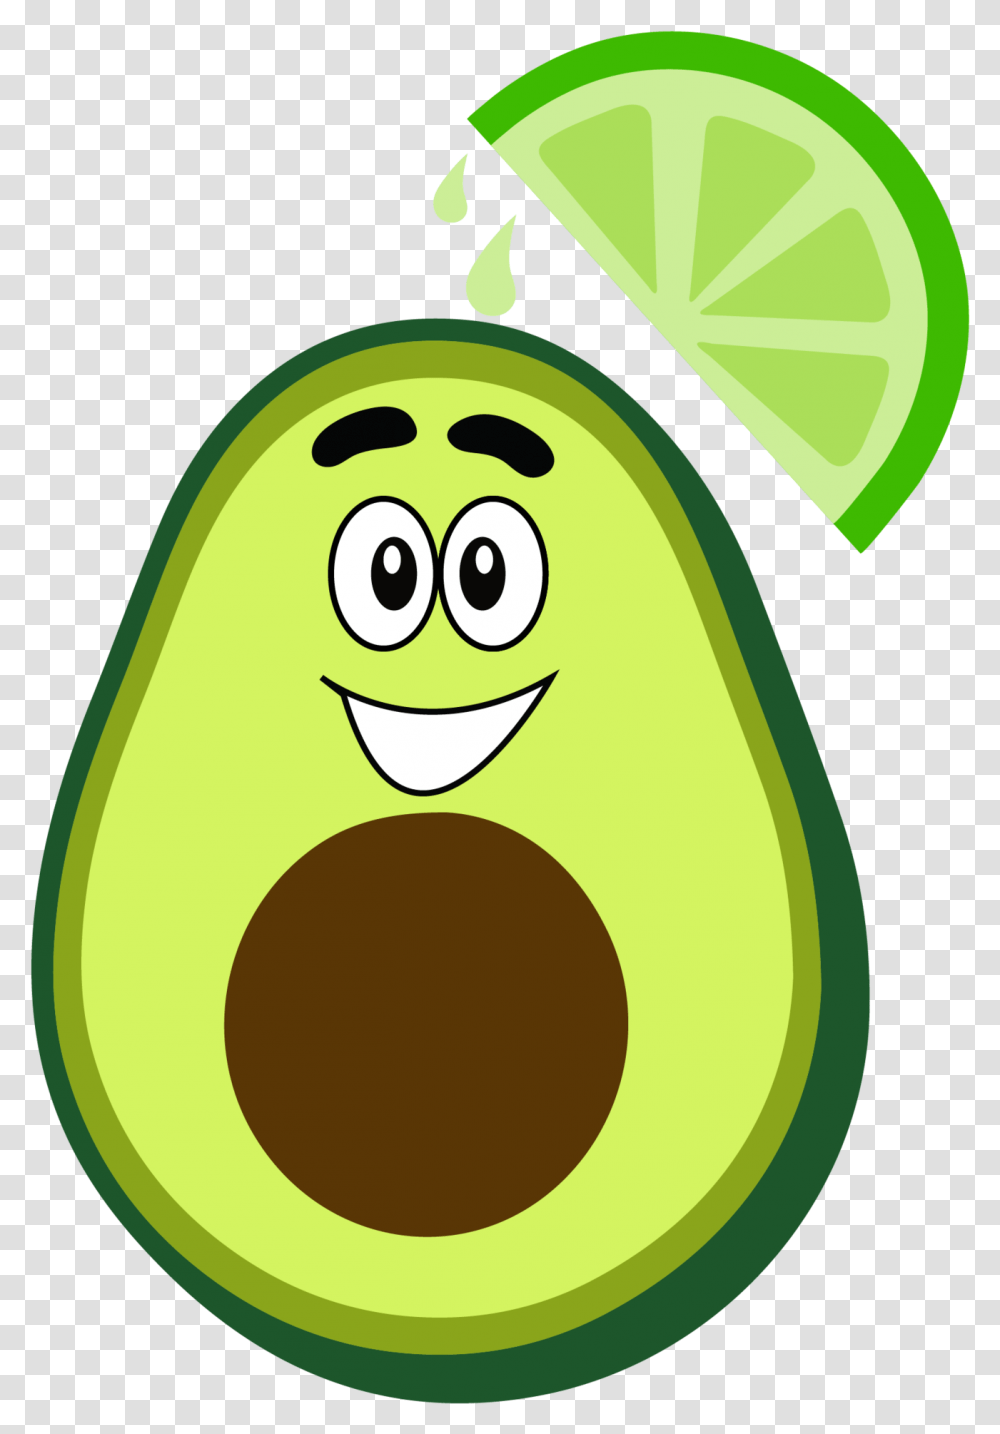 Guacamole Lime On White Cheddar Guacamole Smiley, Plant, Fruit, Food, Avocado Transparent Png